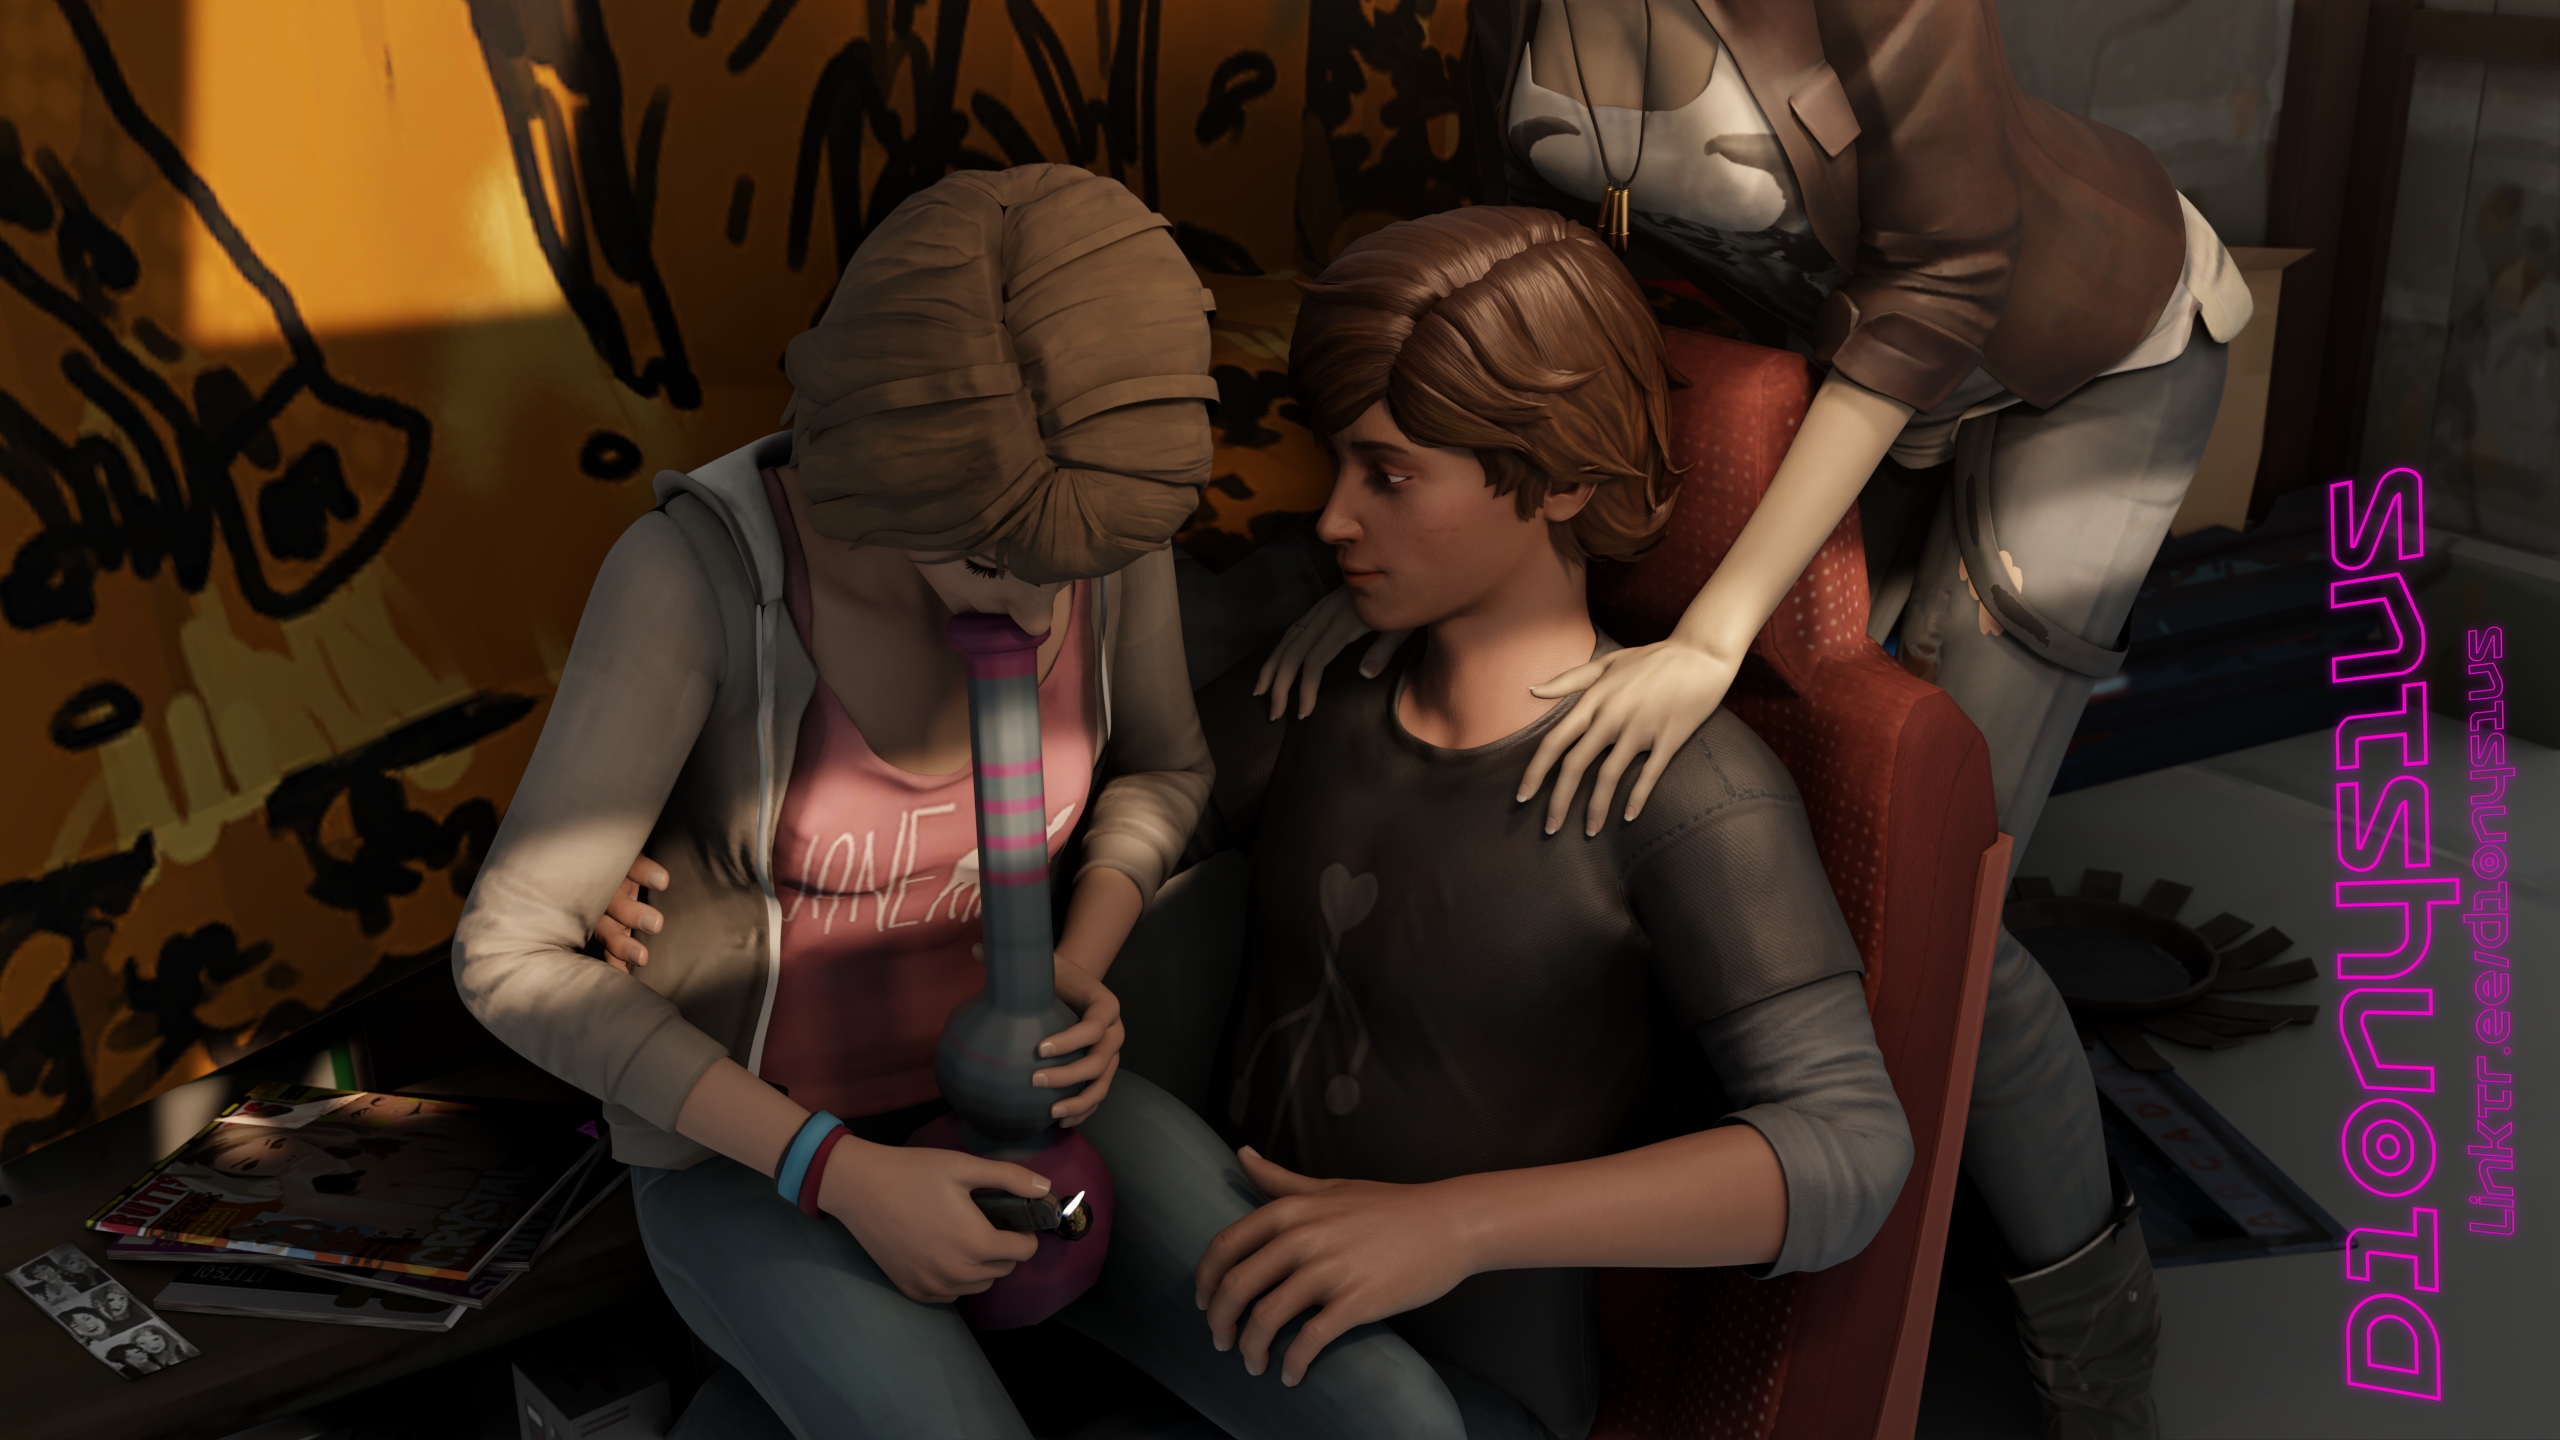 Life is 4/20 Life Is Strange Max Caulfield Chloe Price Warren Graham Vaginal Vaginal Penetration Vaginal Sex Standing Doggy Missionary 2